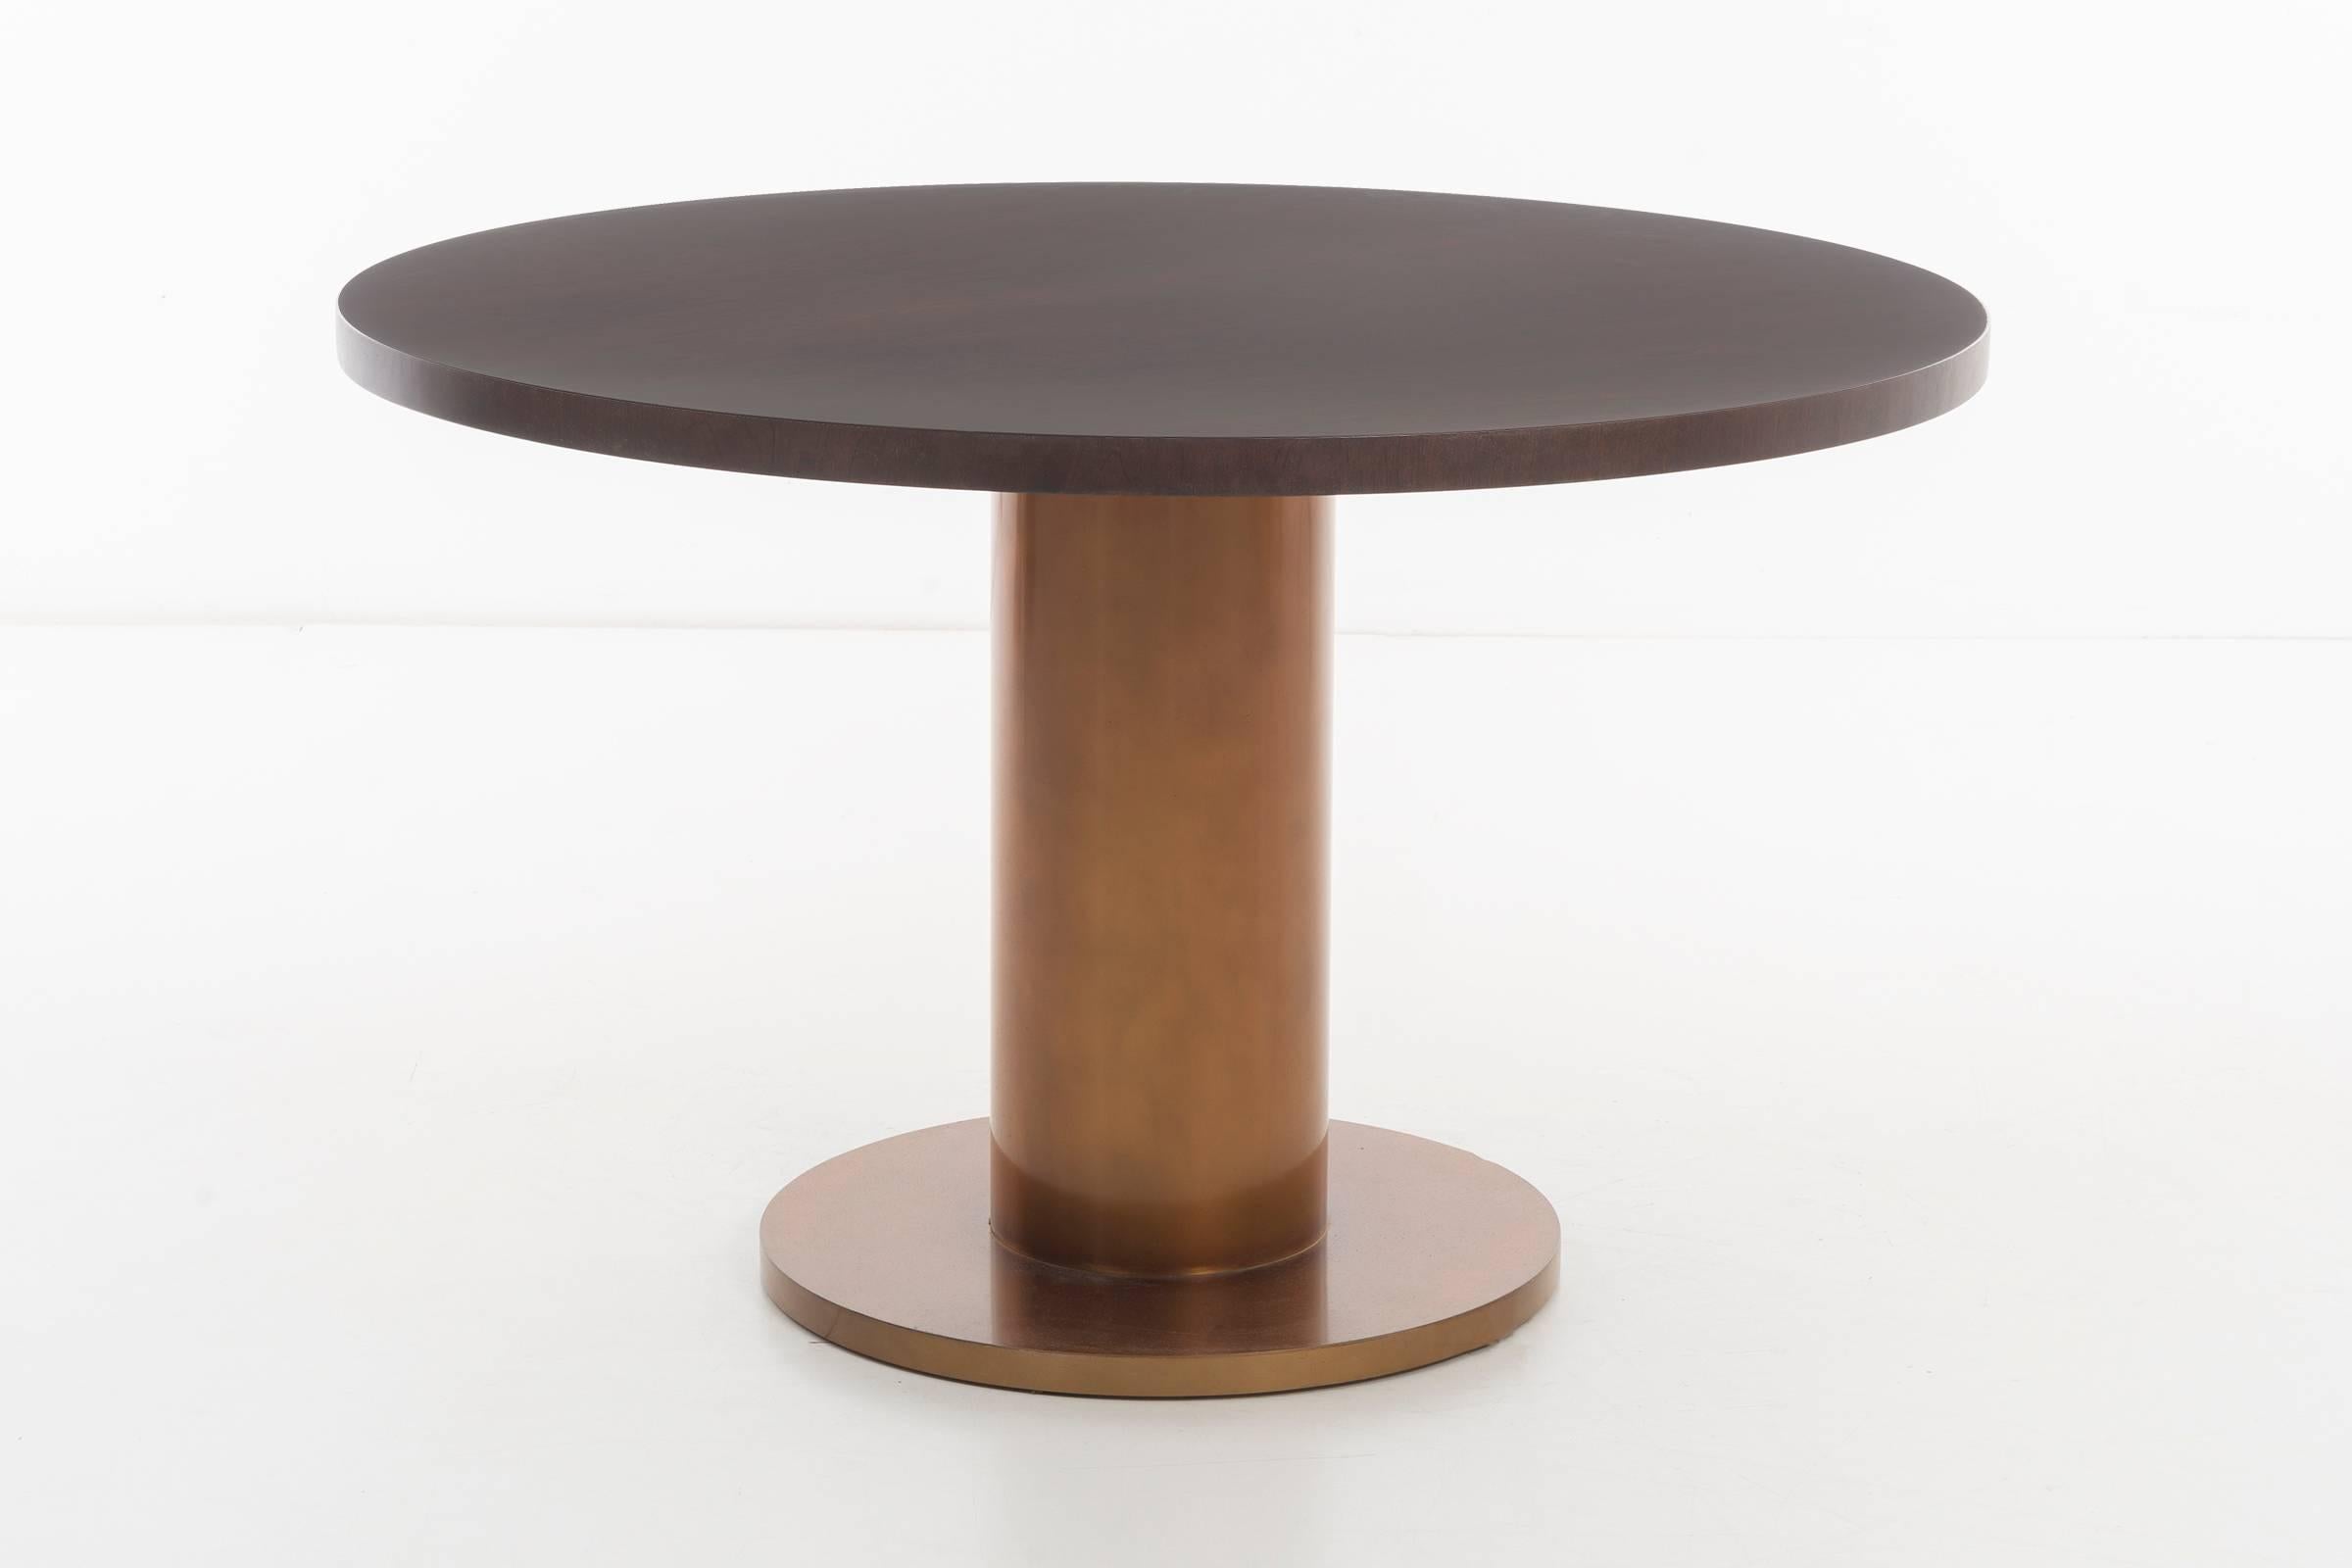 Edward Wormley for Dunbar dining/centre table.
Model 5474 with Tawi wood stained top and bronze base.
Restored, base and refinished top.
Applied brass tag on underside [DUNBAR*BERNE INDIANNA].